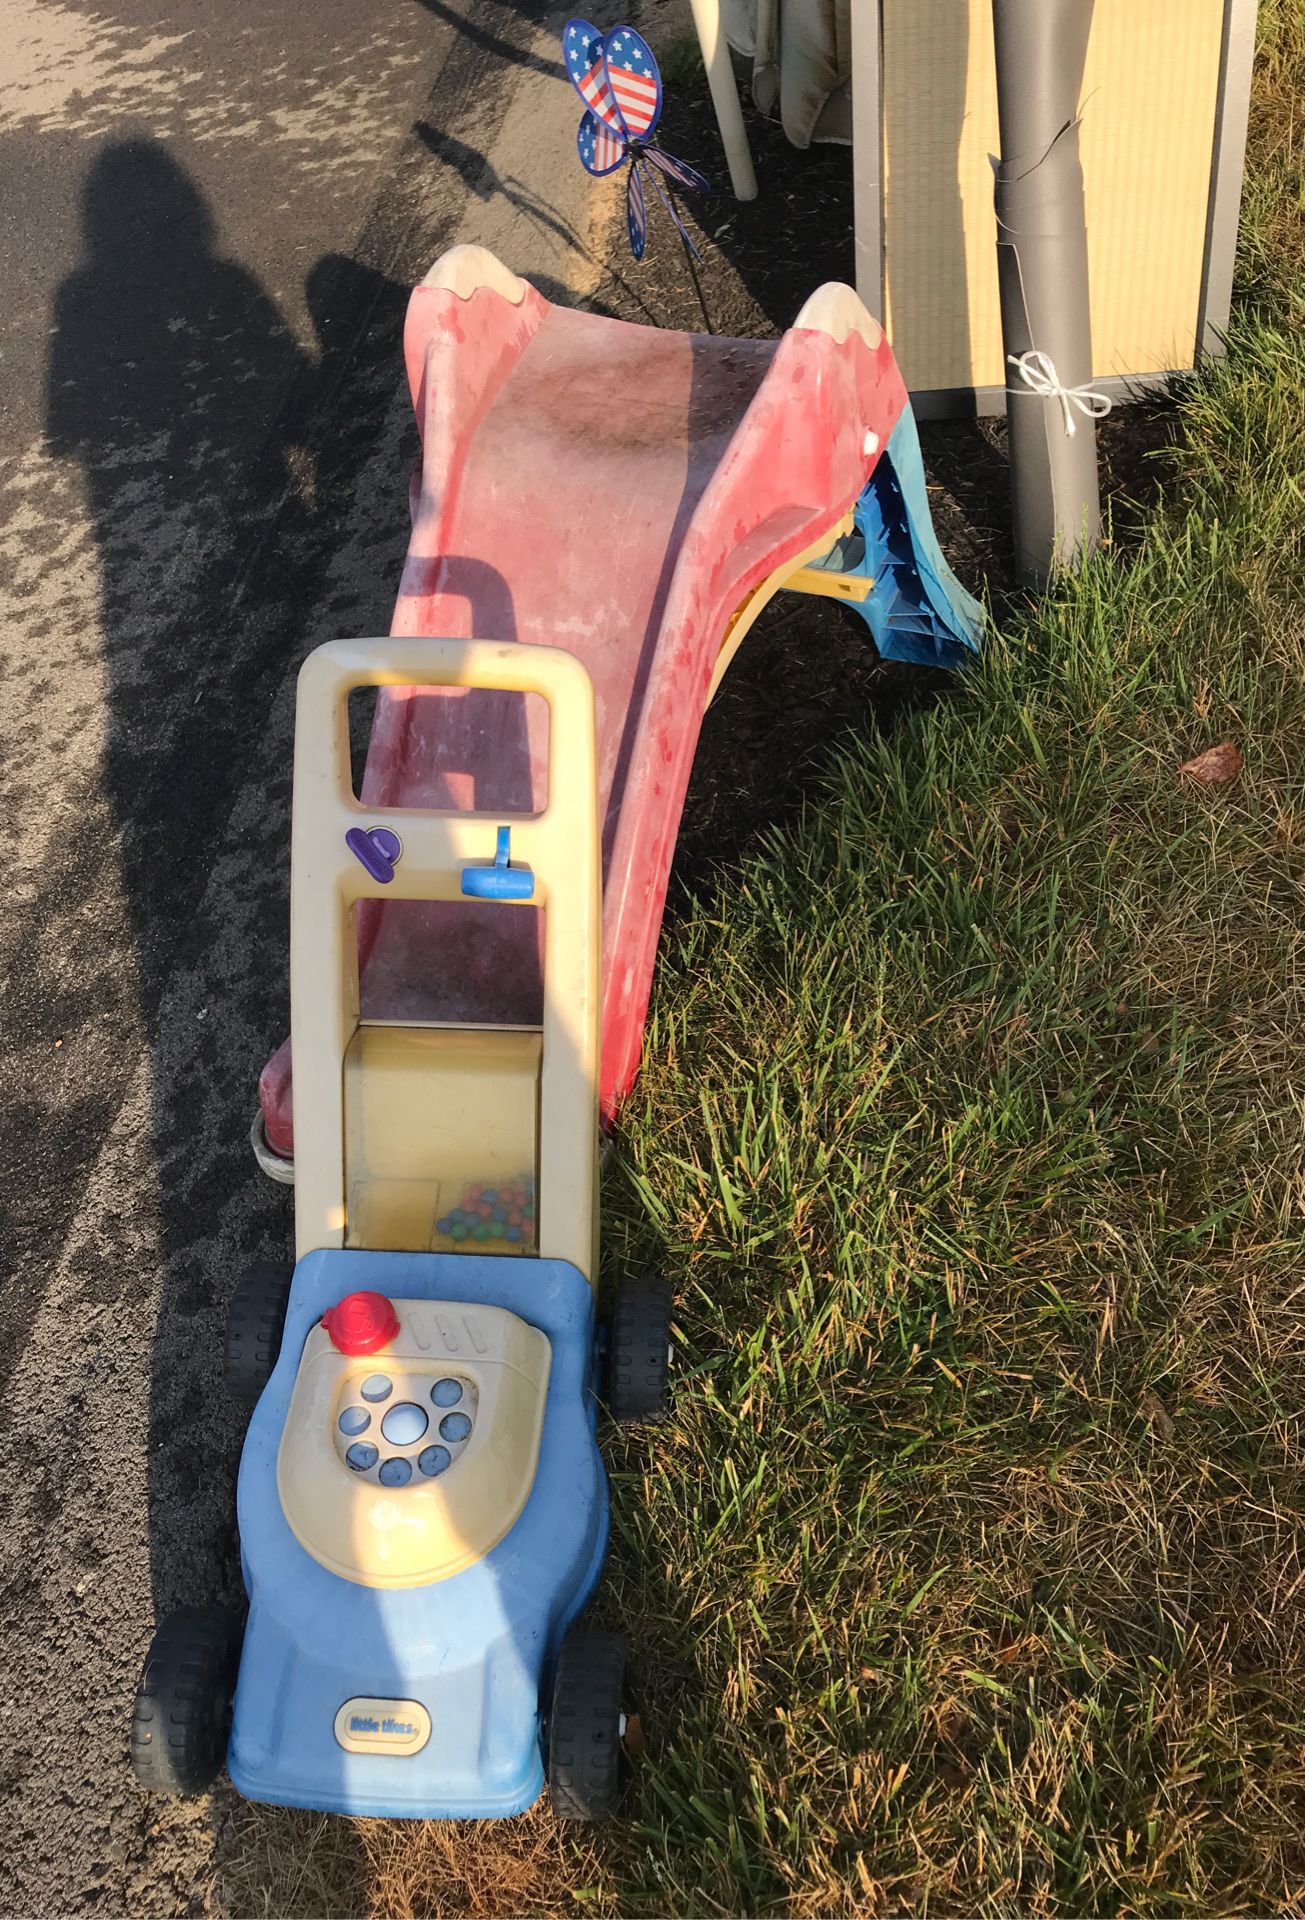 Free toddler slide & toy lawn mower at curb